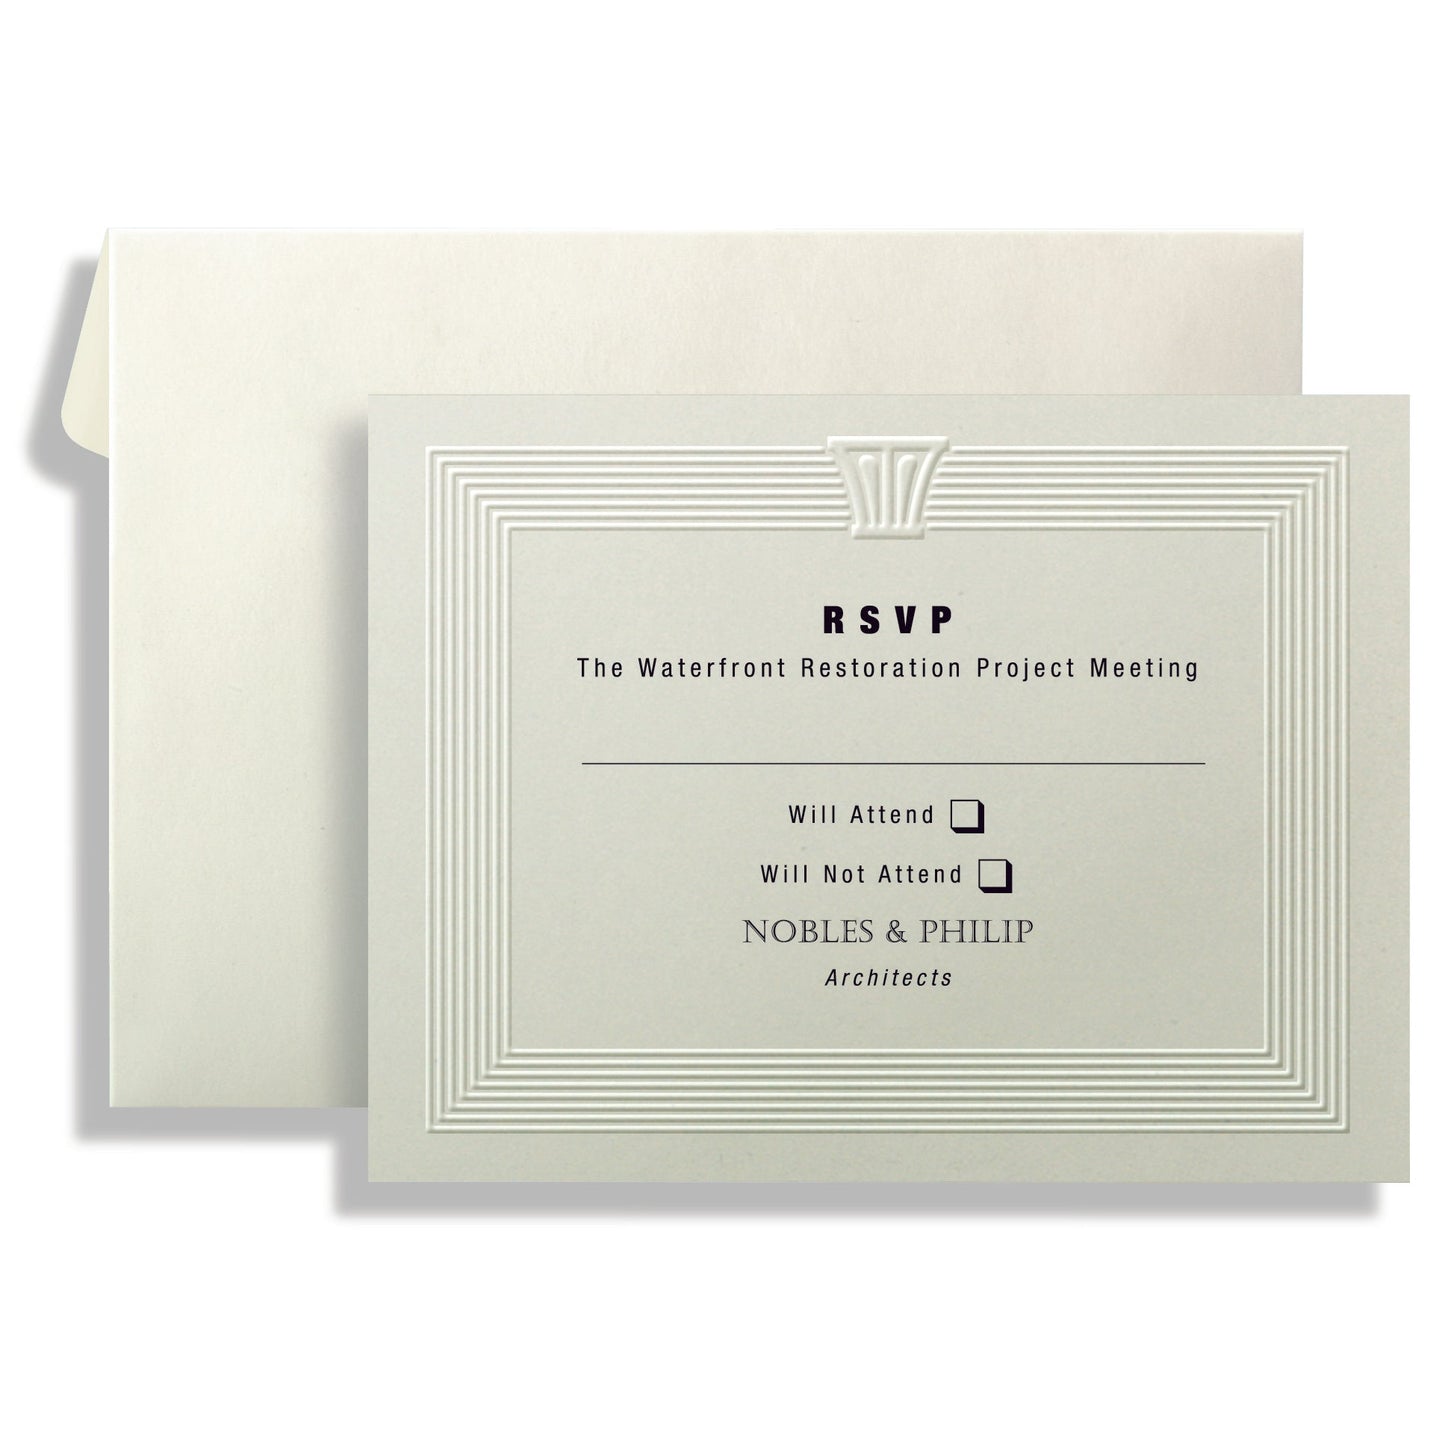 St. James® Overtures® Reply Cards, Capital Emboss, White, 40 Sets